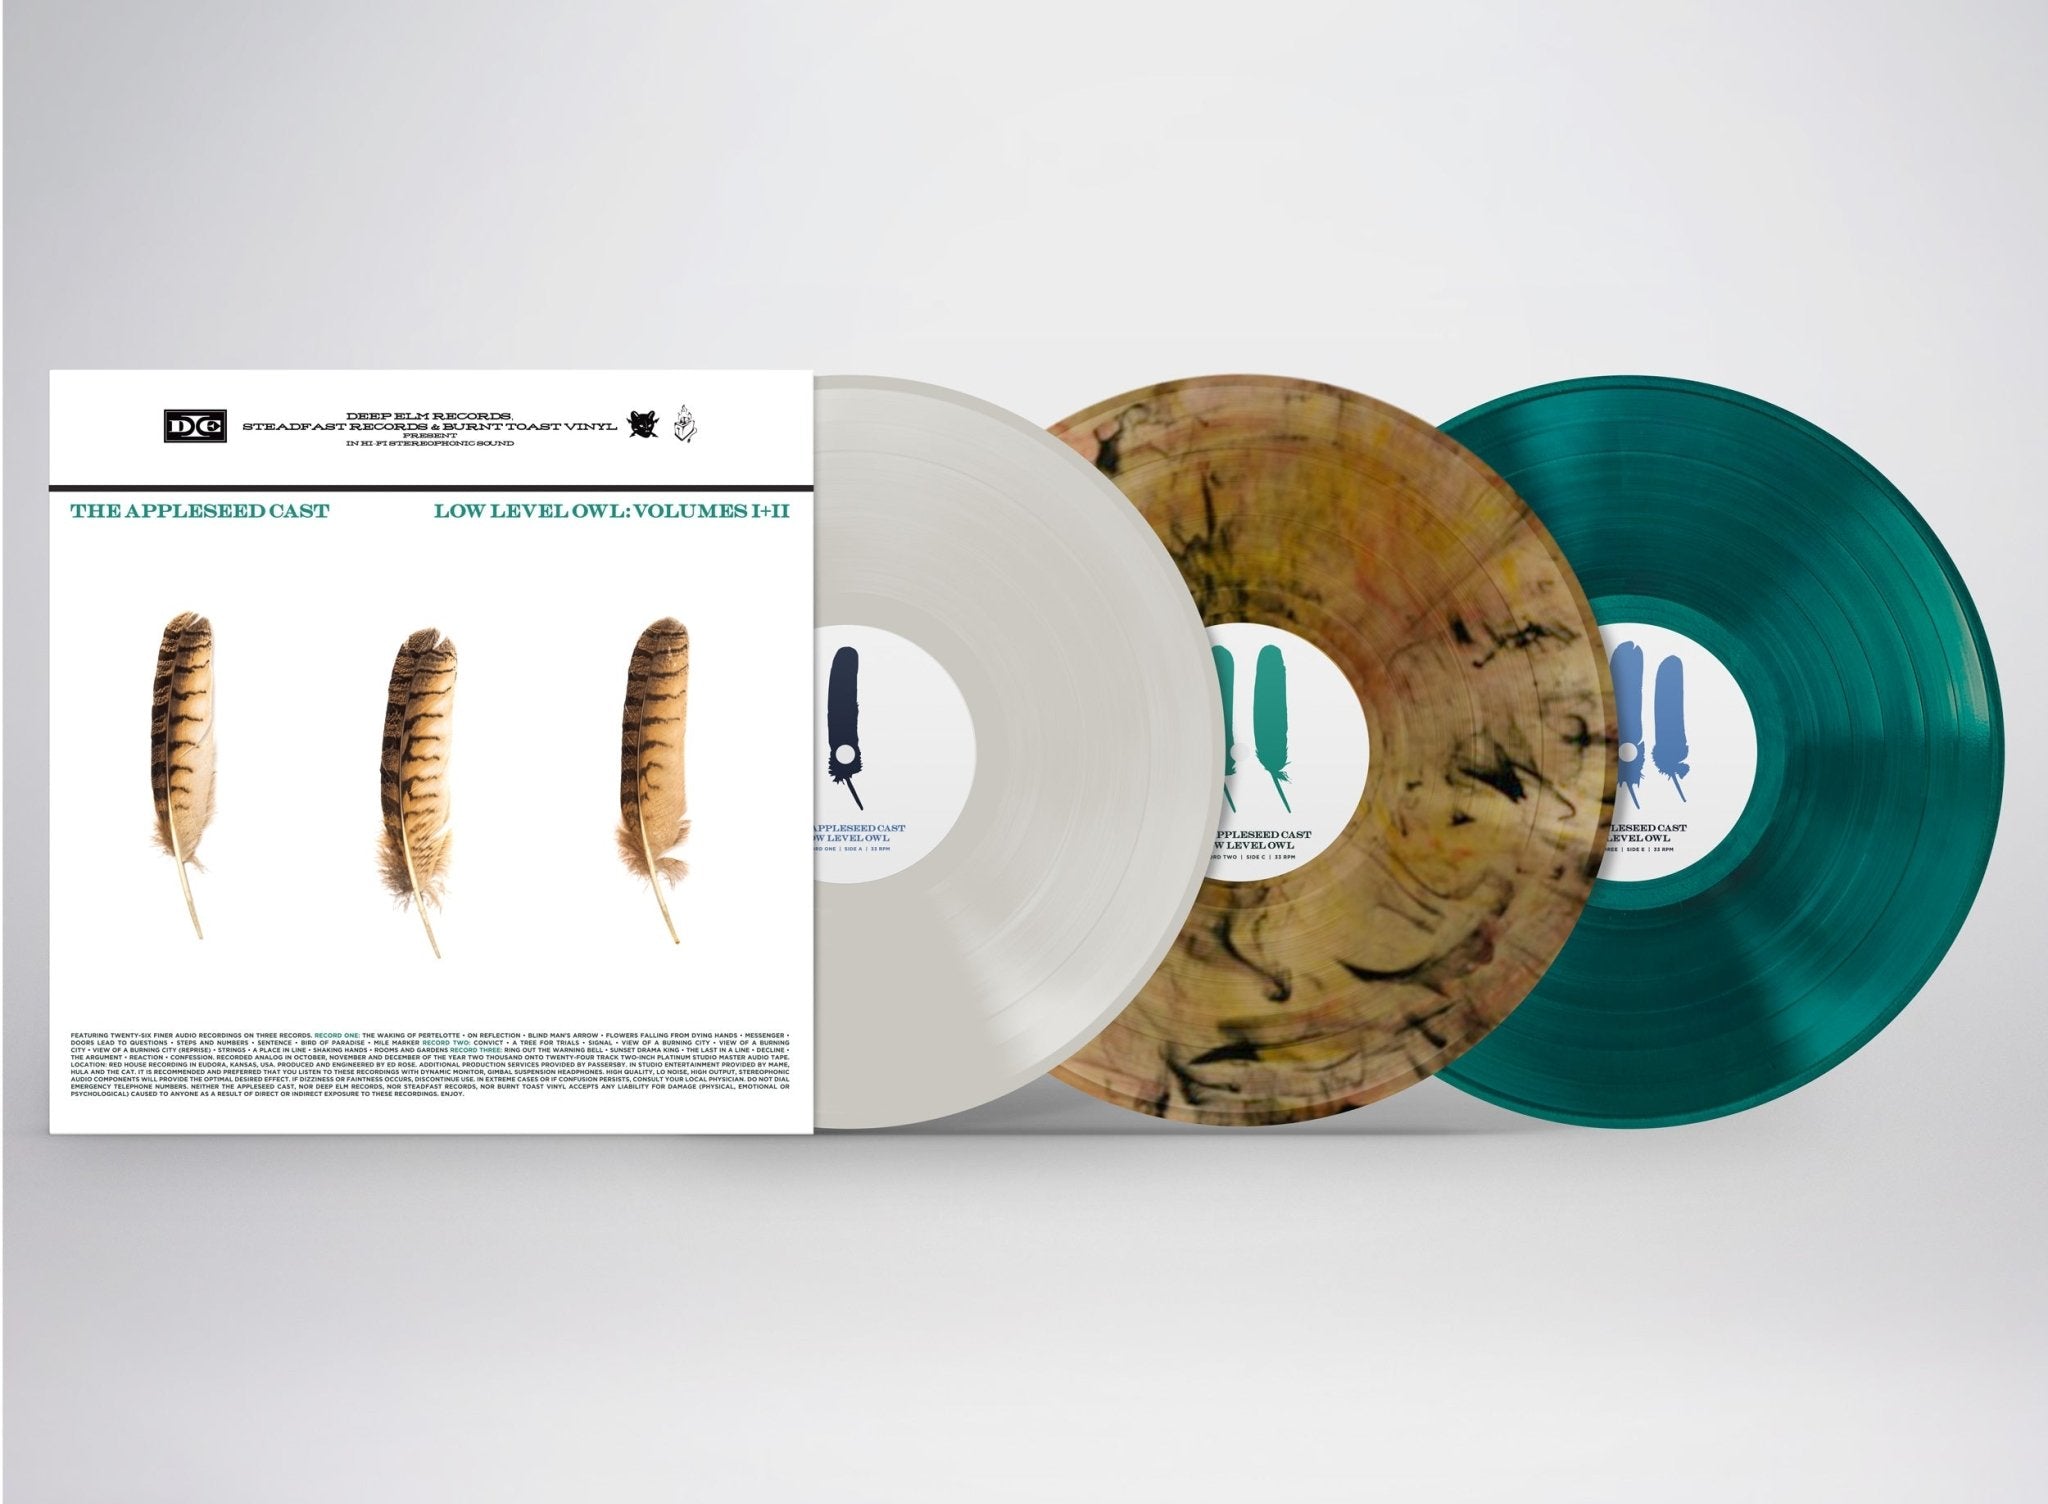 The Appleseed Cast: Low Level Owl: Volumes I + II: 3xLP Vinyl - Steadfast Records